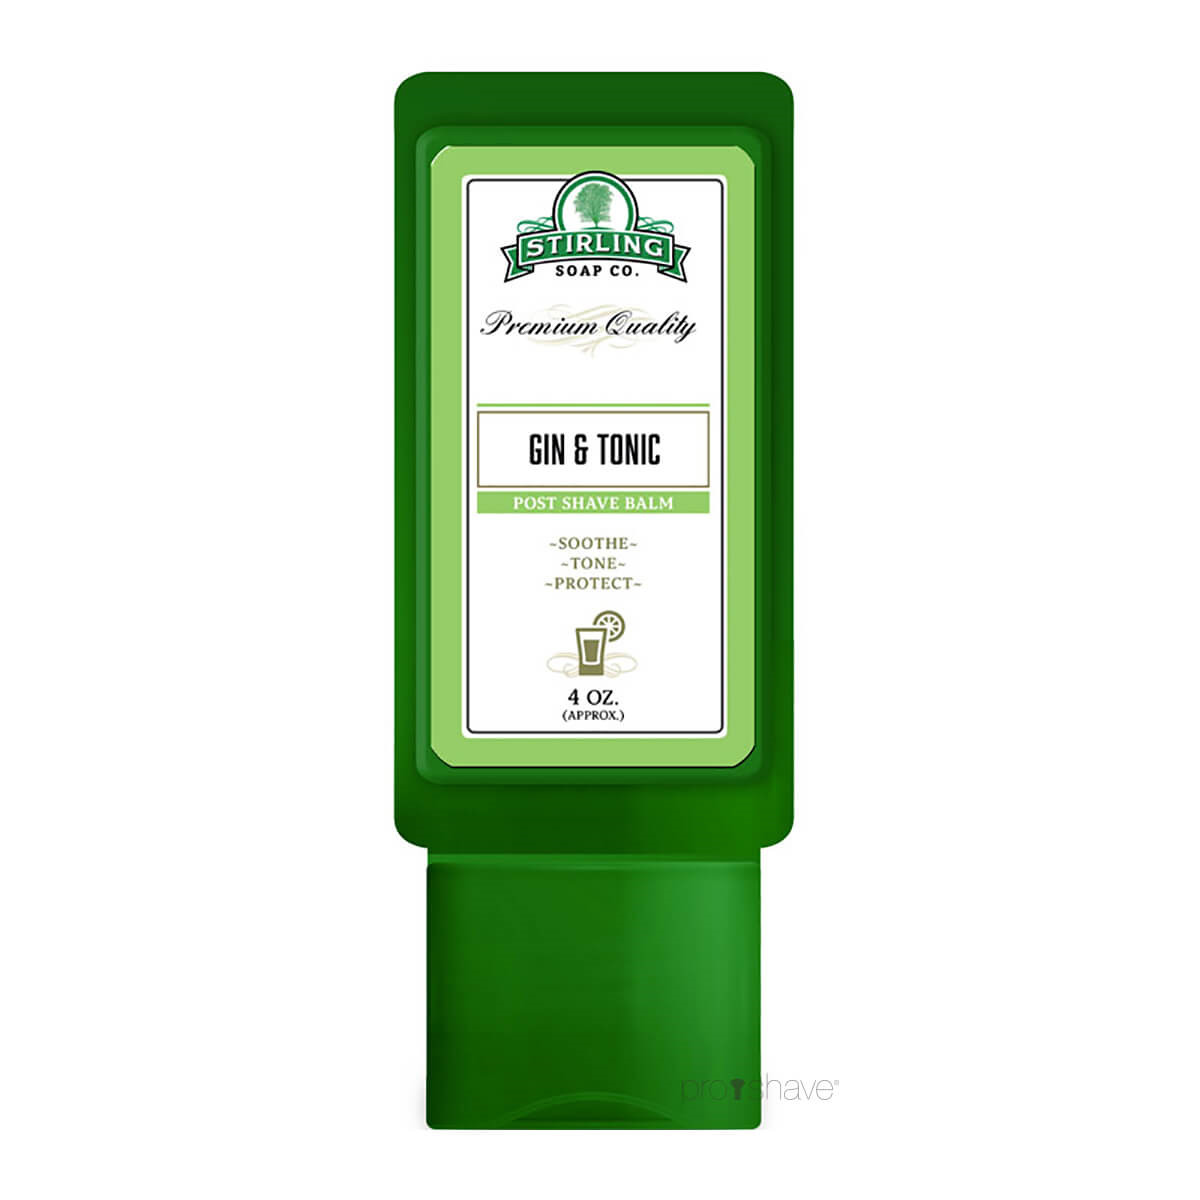 Stirling Soap Co. Aftershave Balm, Gin & Tonic on the Rocks, 118 ml.